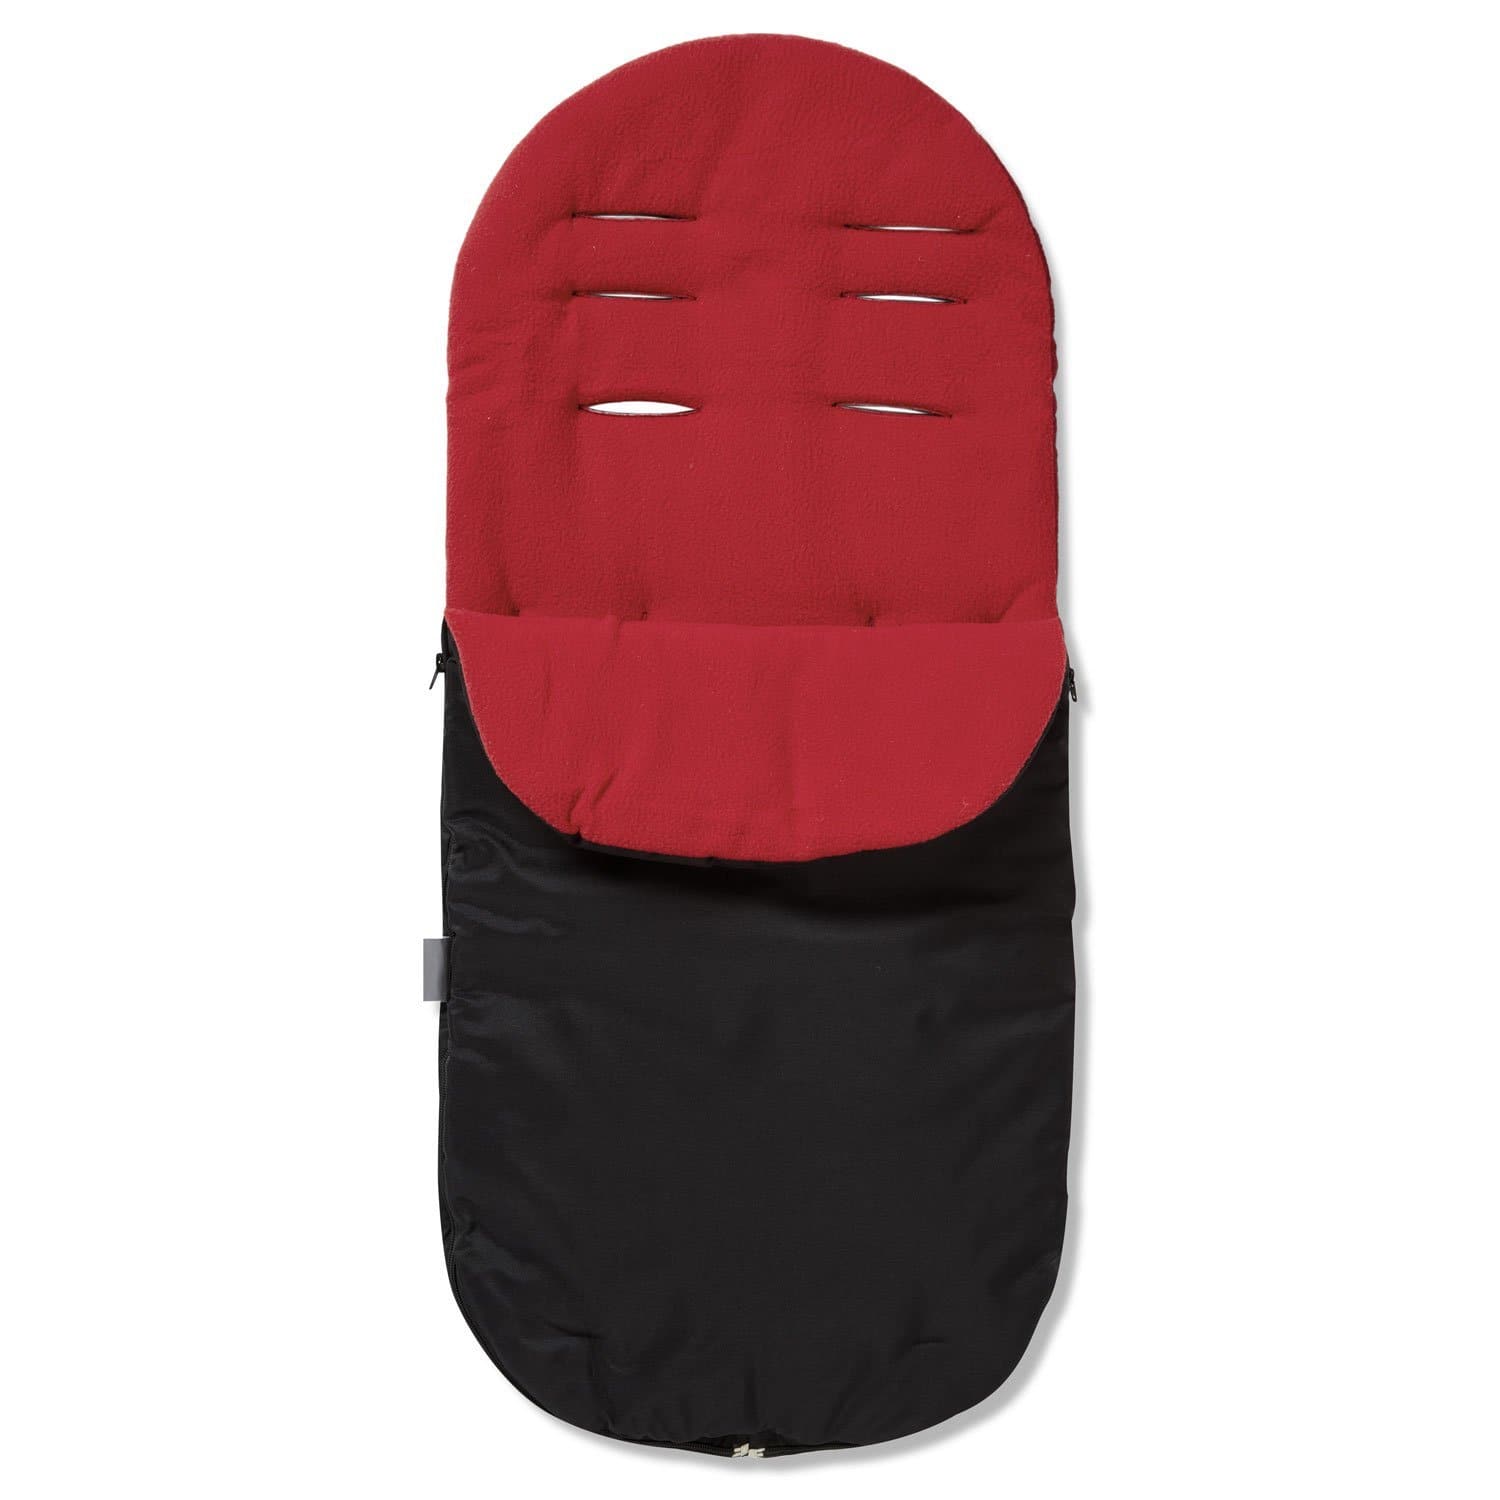 Footmuff / Cosy Toes Compatible with Babystyle - Red / Fits All Models | For Your Little One